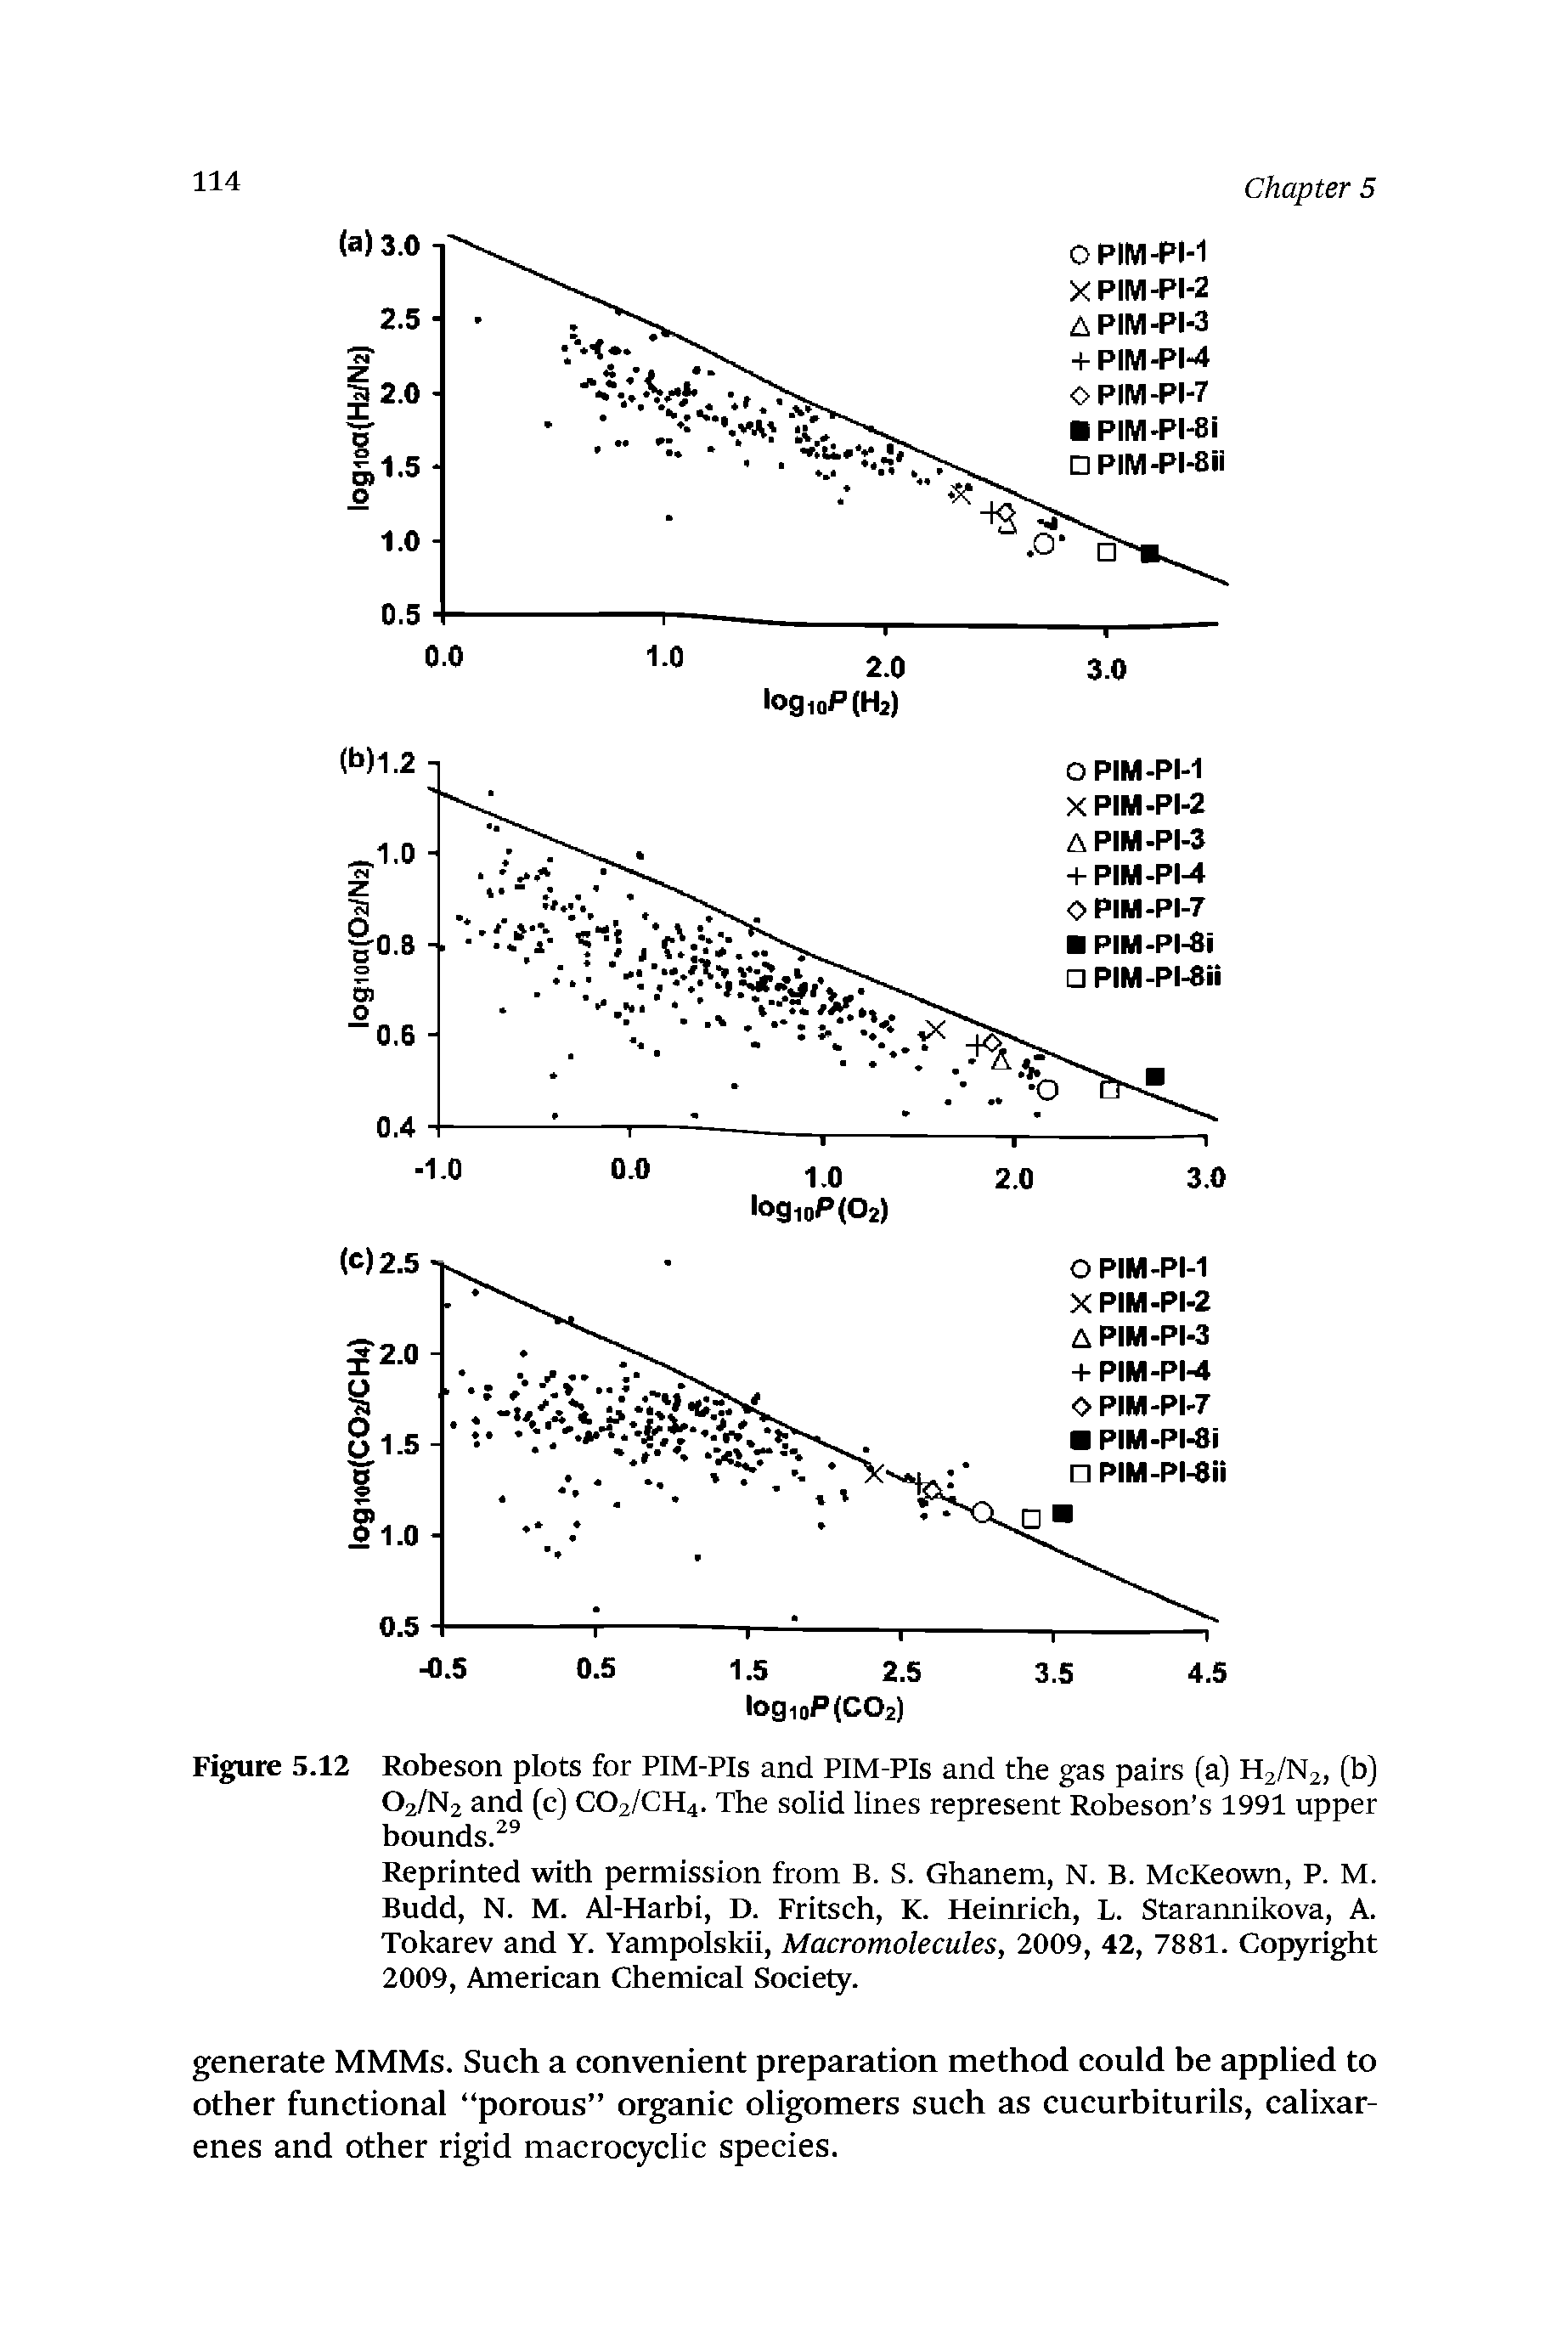 Figure 5.12 Robeson plots for PIM-PIs and PIM-PIs and the gas pairs (a) H2/N2, (b) O2/N2 and (c) CO2/CH4. The solid lines represent Robeson s 1991 upper bounds. ...